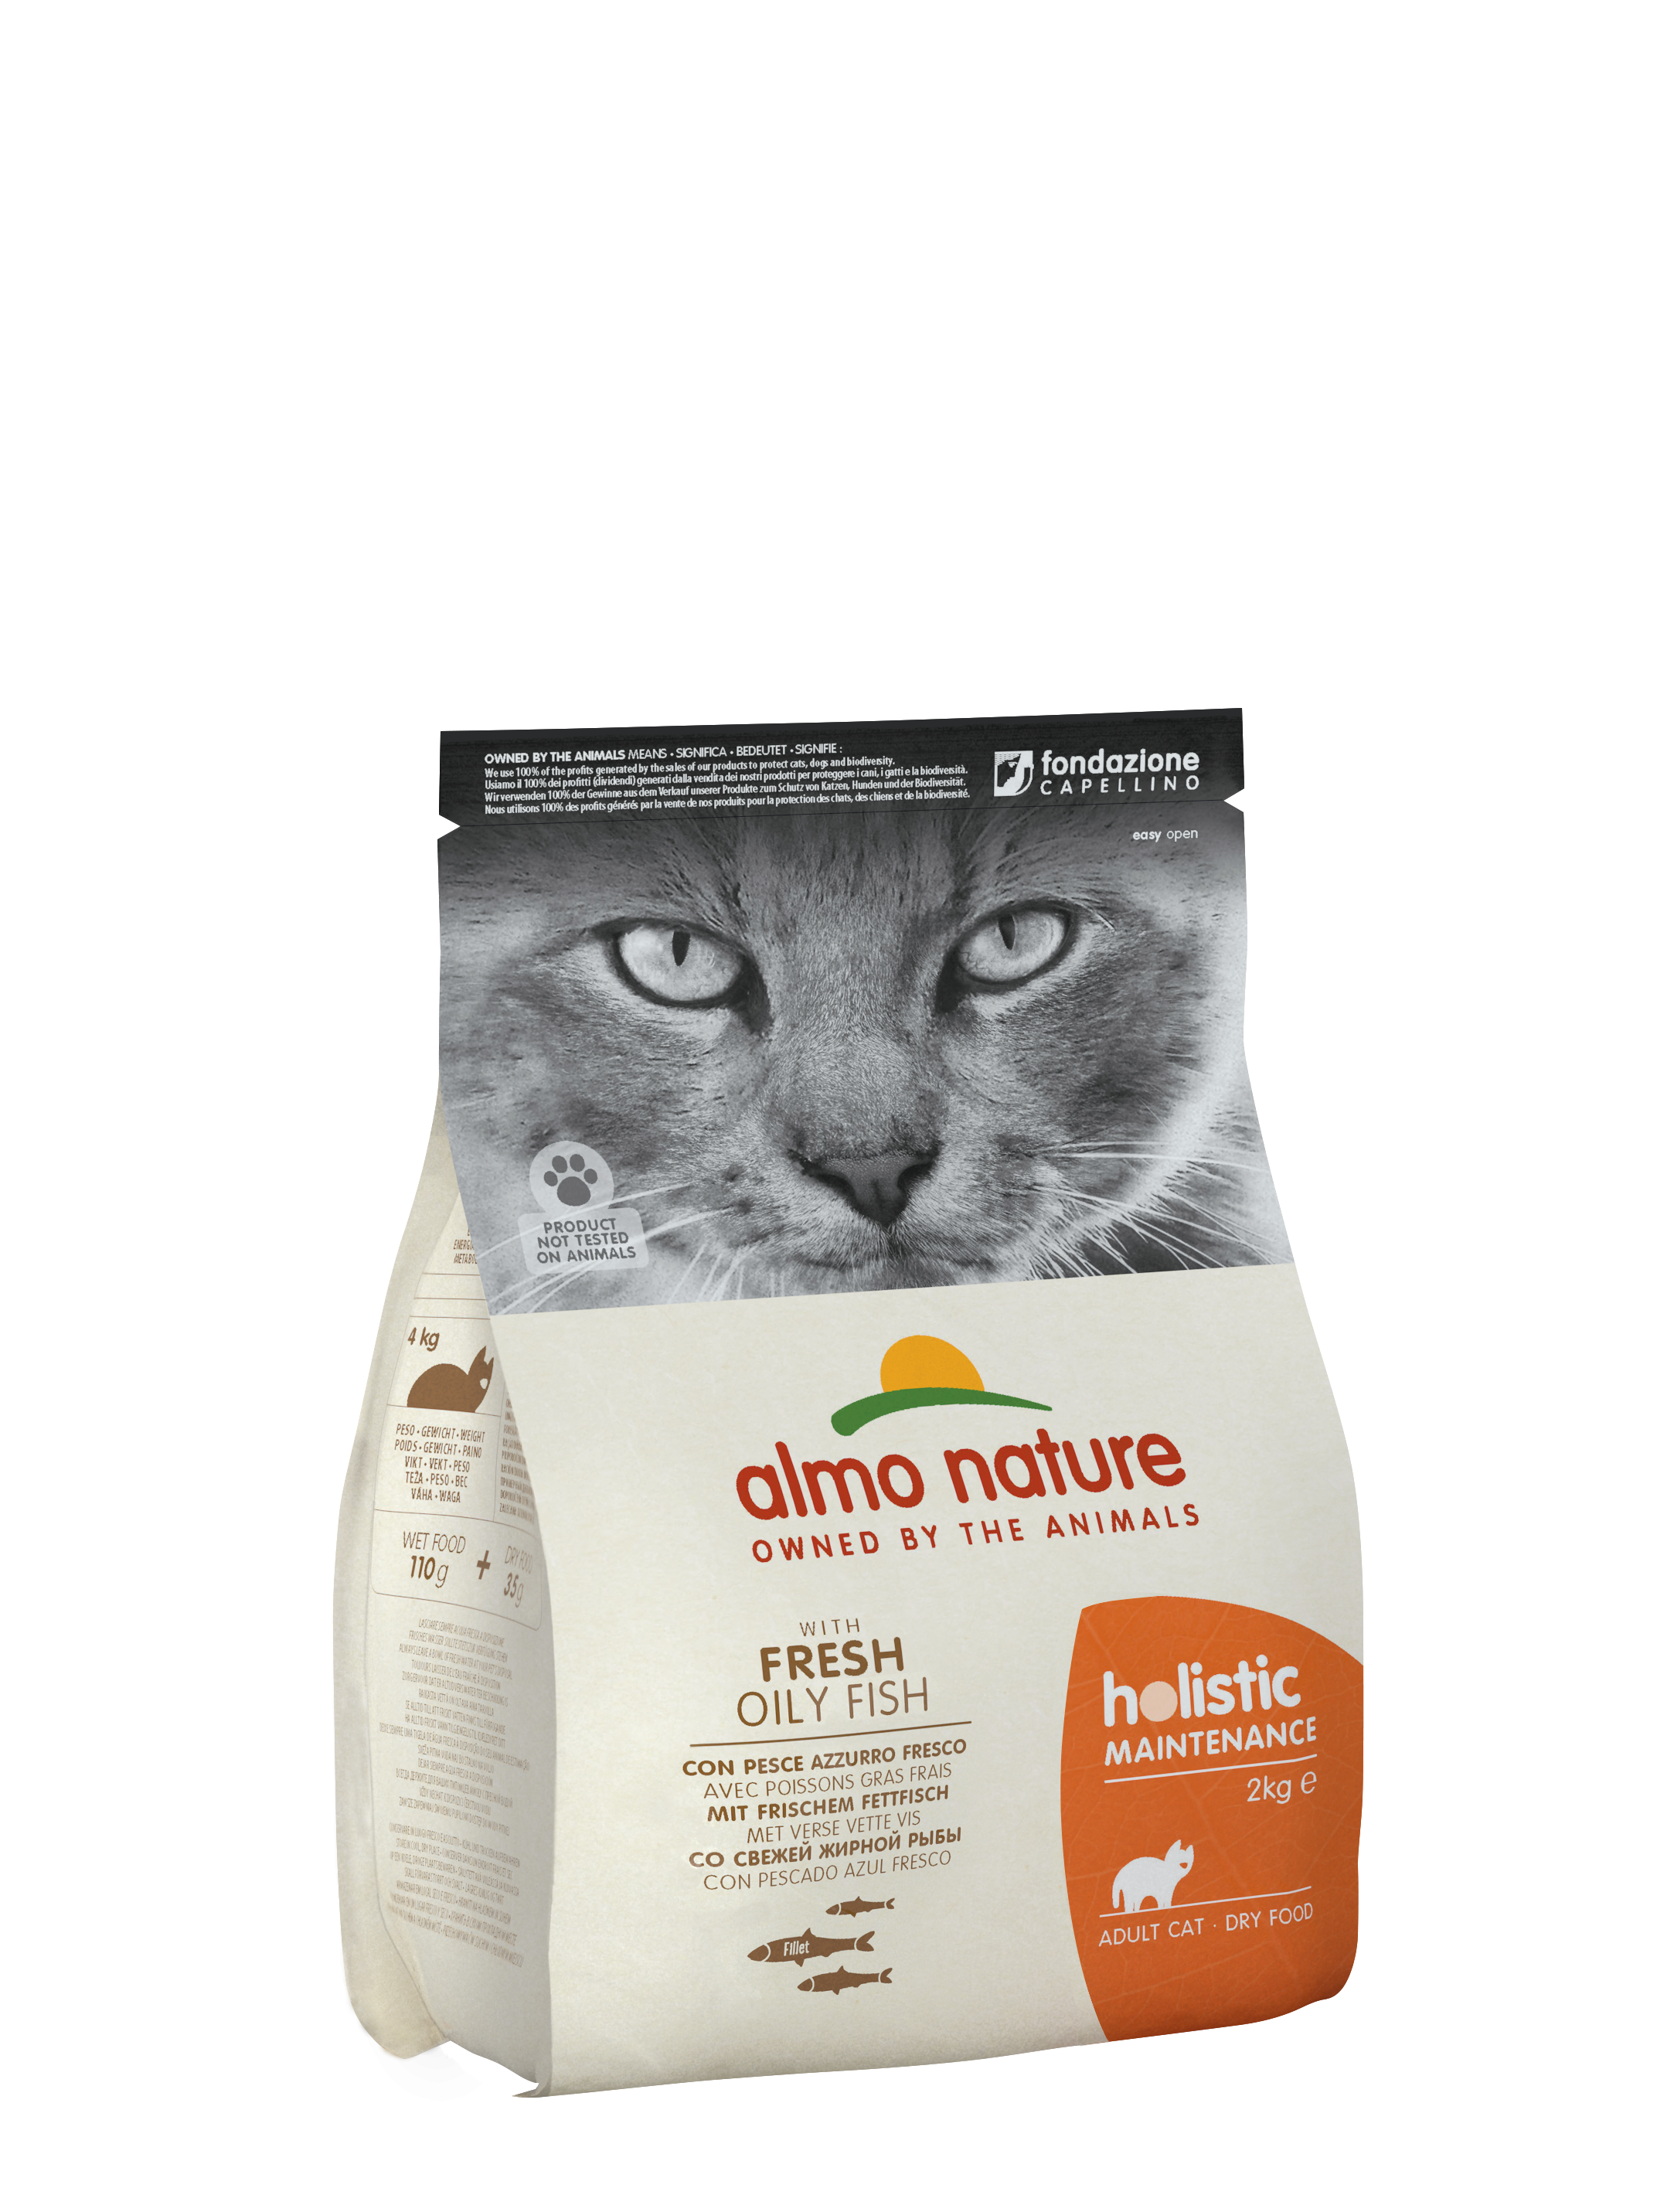 Almo Nature - HOLISTIC Maintenance with Fresh Oily Fish Dry Food 2kg for Cats